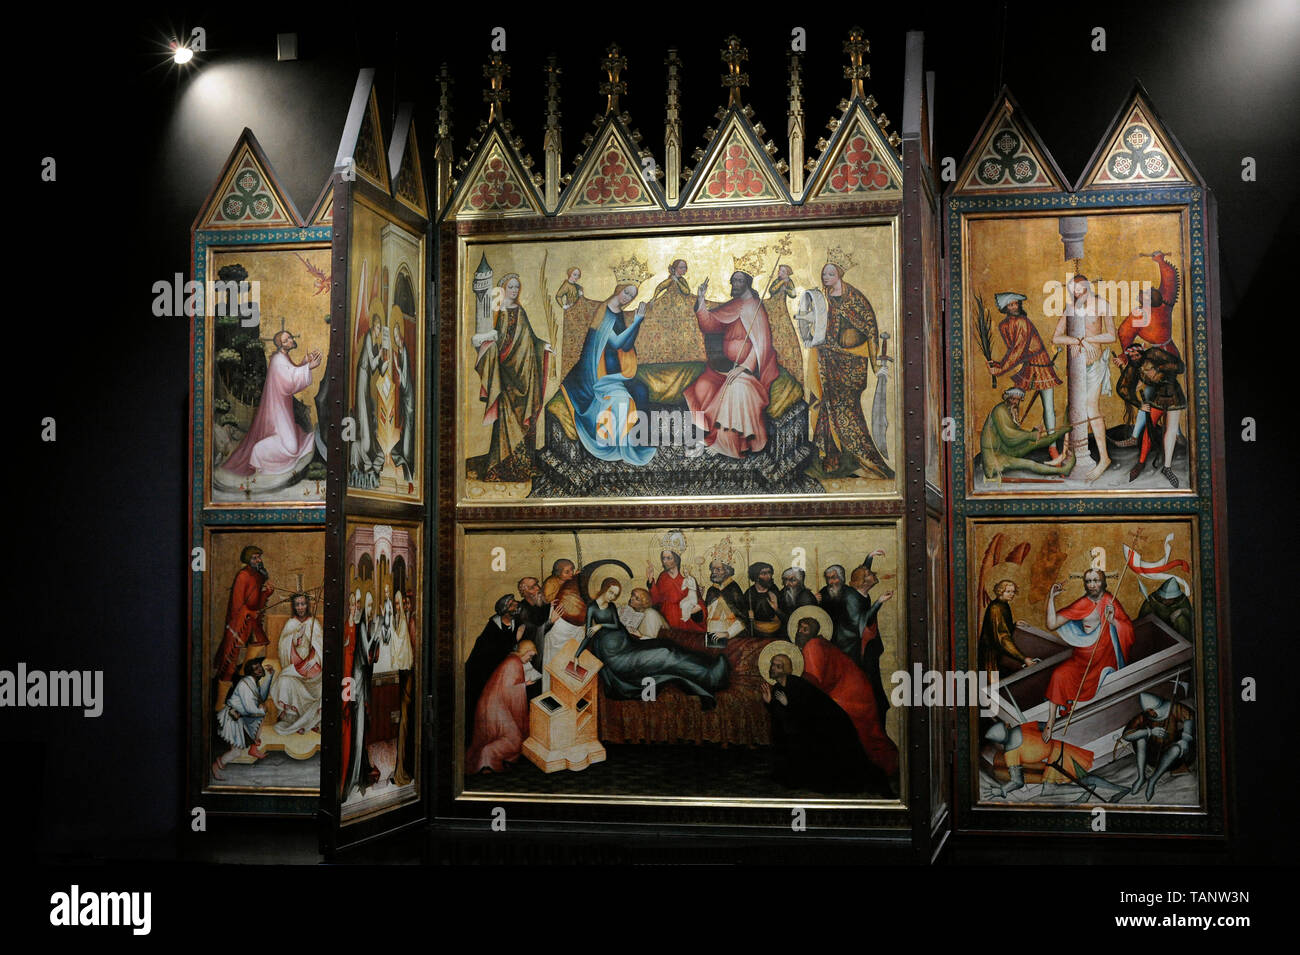 Master of the Altarpiece of Graudenz (late of 14th century-early 15th century). Polyptych from Graudenz. Pomerania, ca.1390. From the Chapel of the Teutonic Knights Castle in Graudenz (Poland). National Museum. Warsaw. Poland. Stock Photo